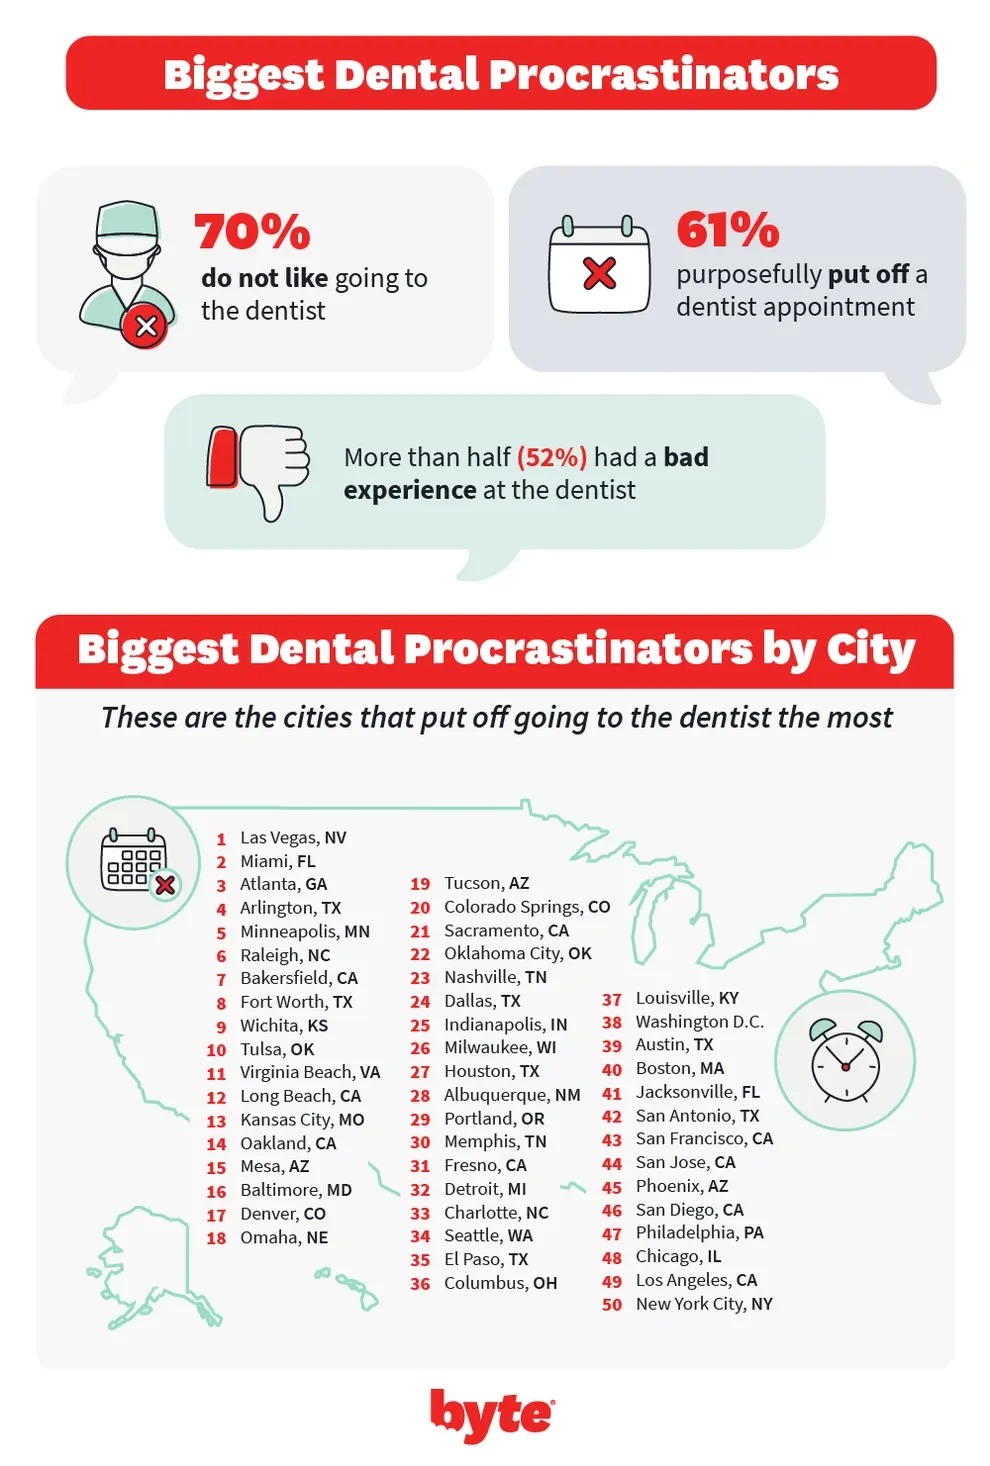 Reasons people are skipping the dentist